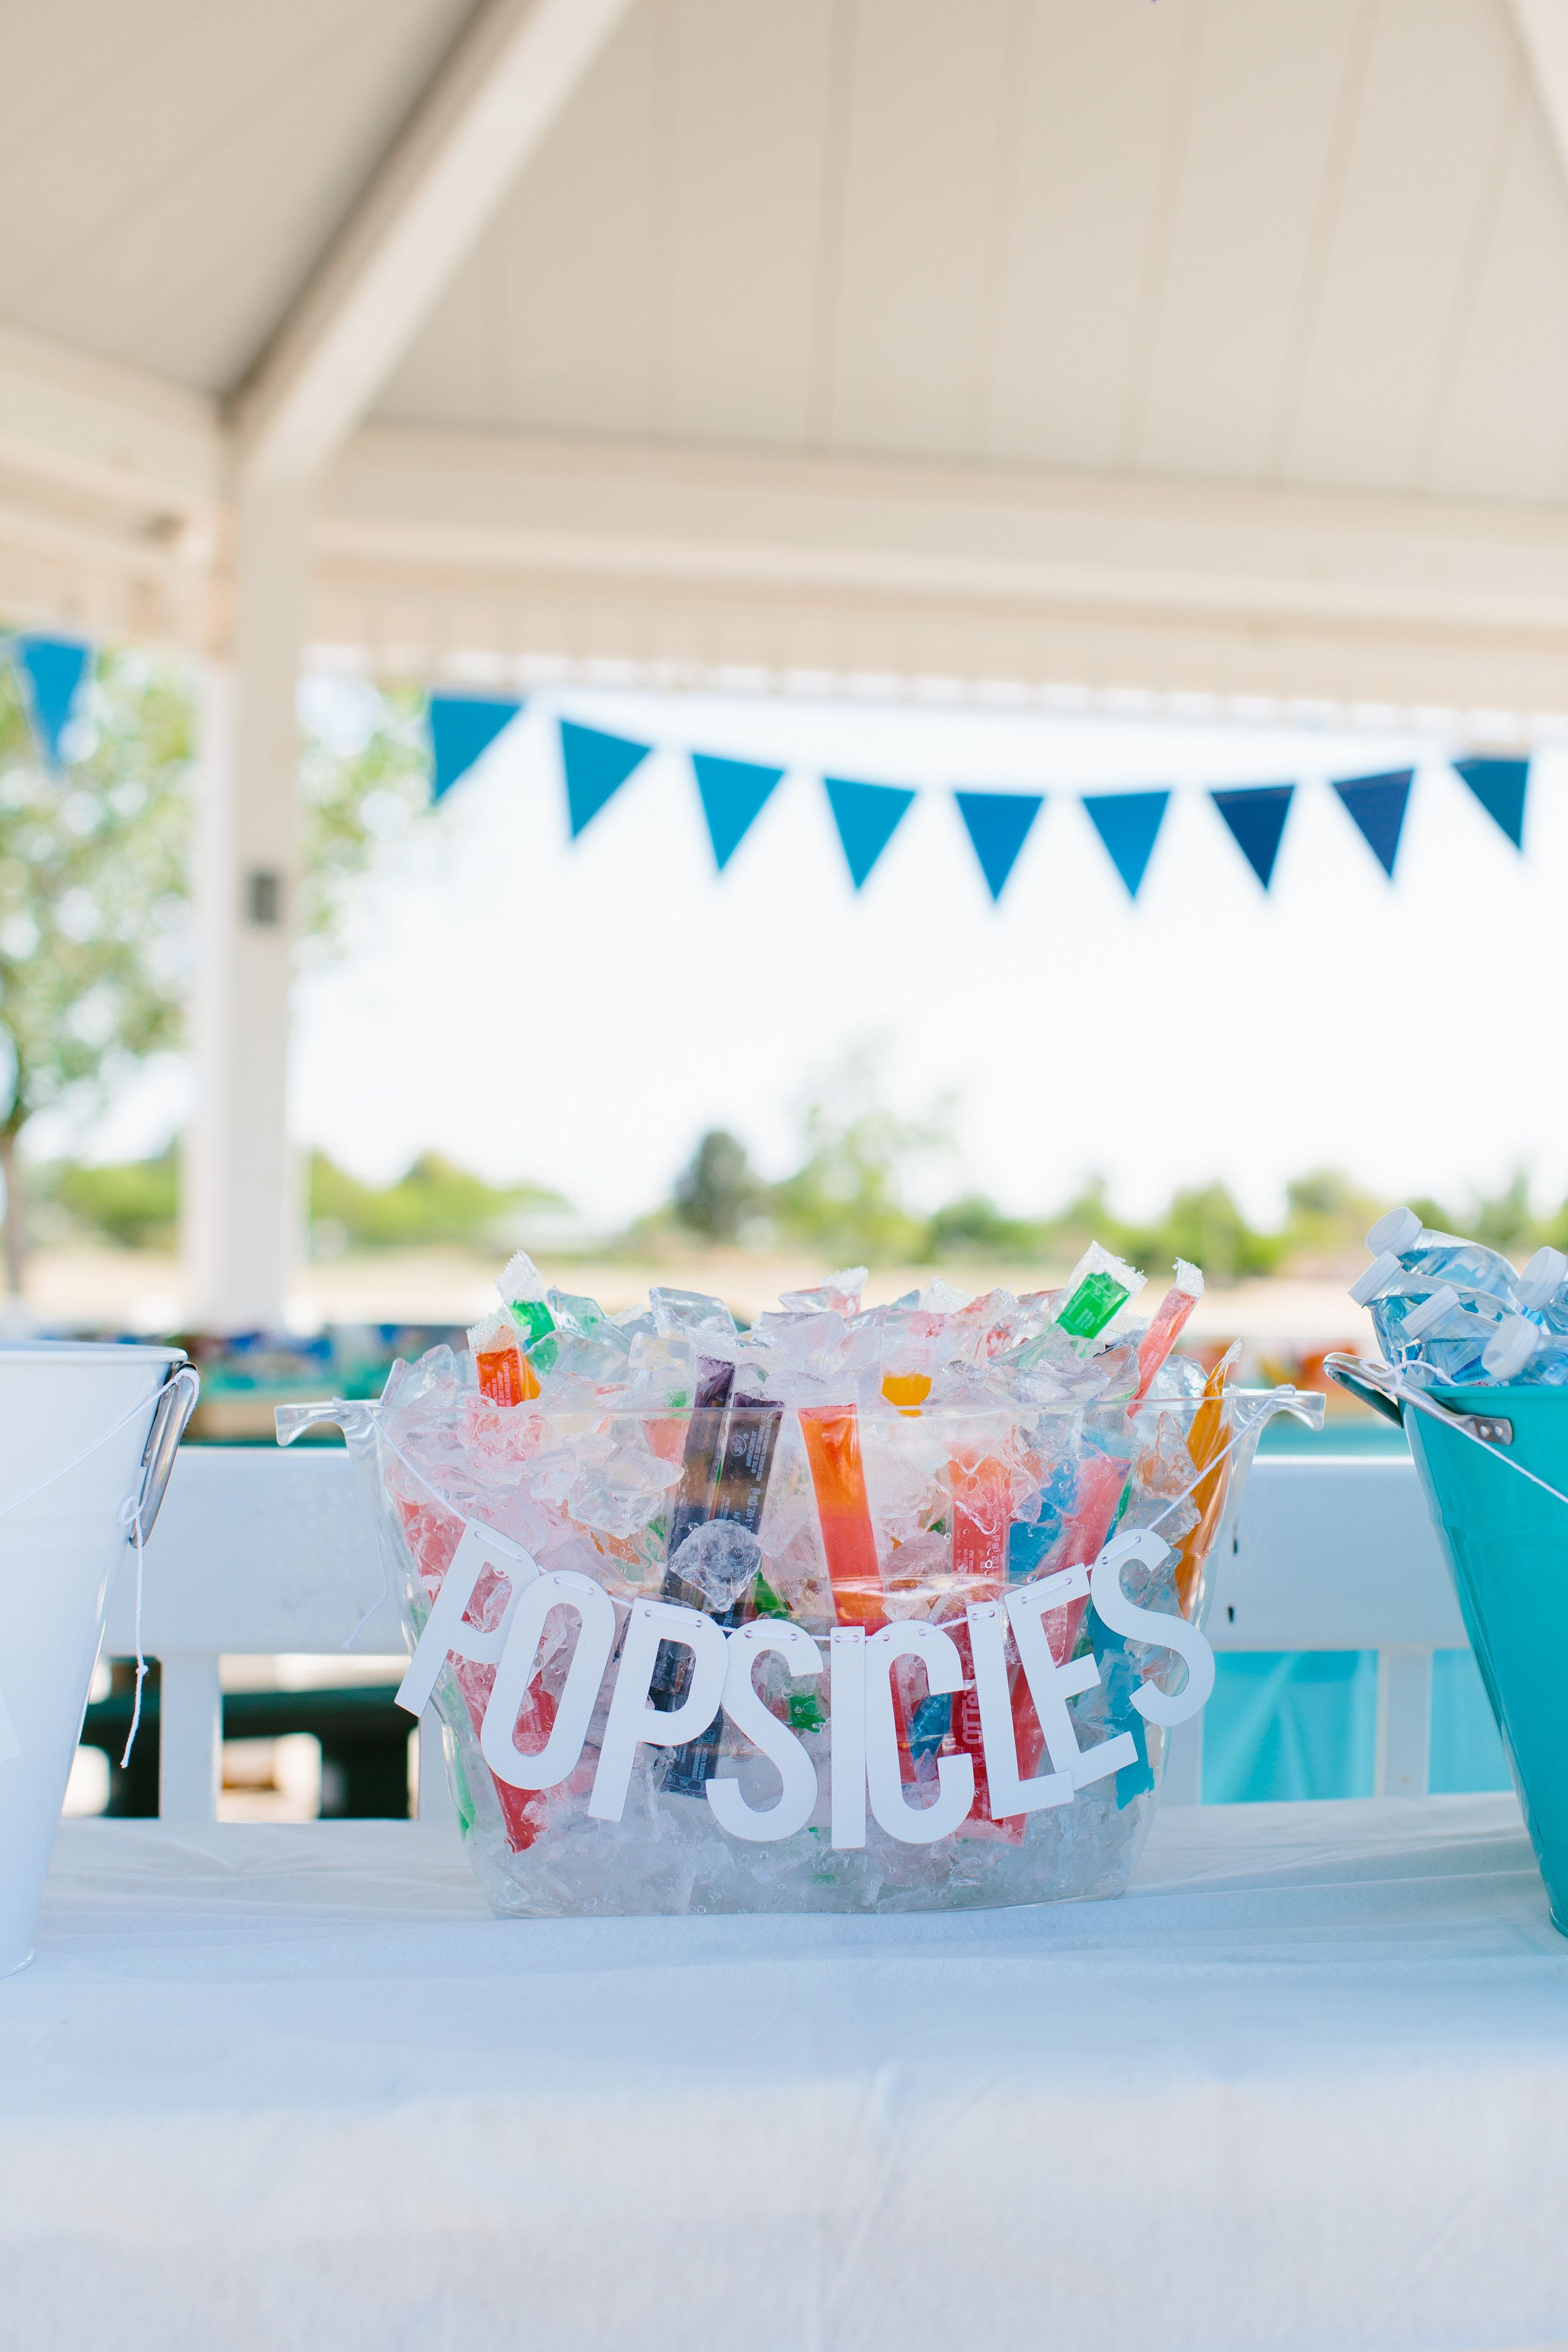 Pool Party Ideas For 6 Year Olds
 A First Birthday Picnic in the Park